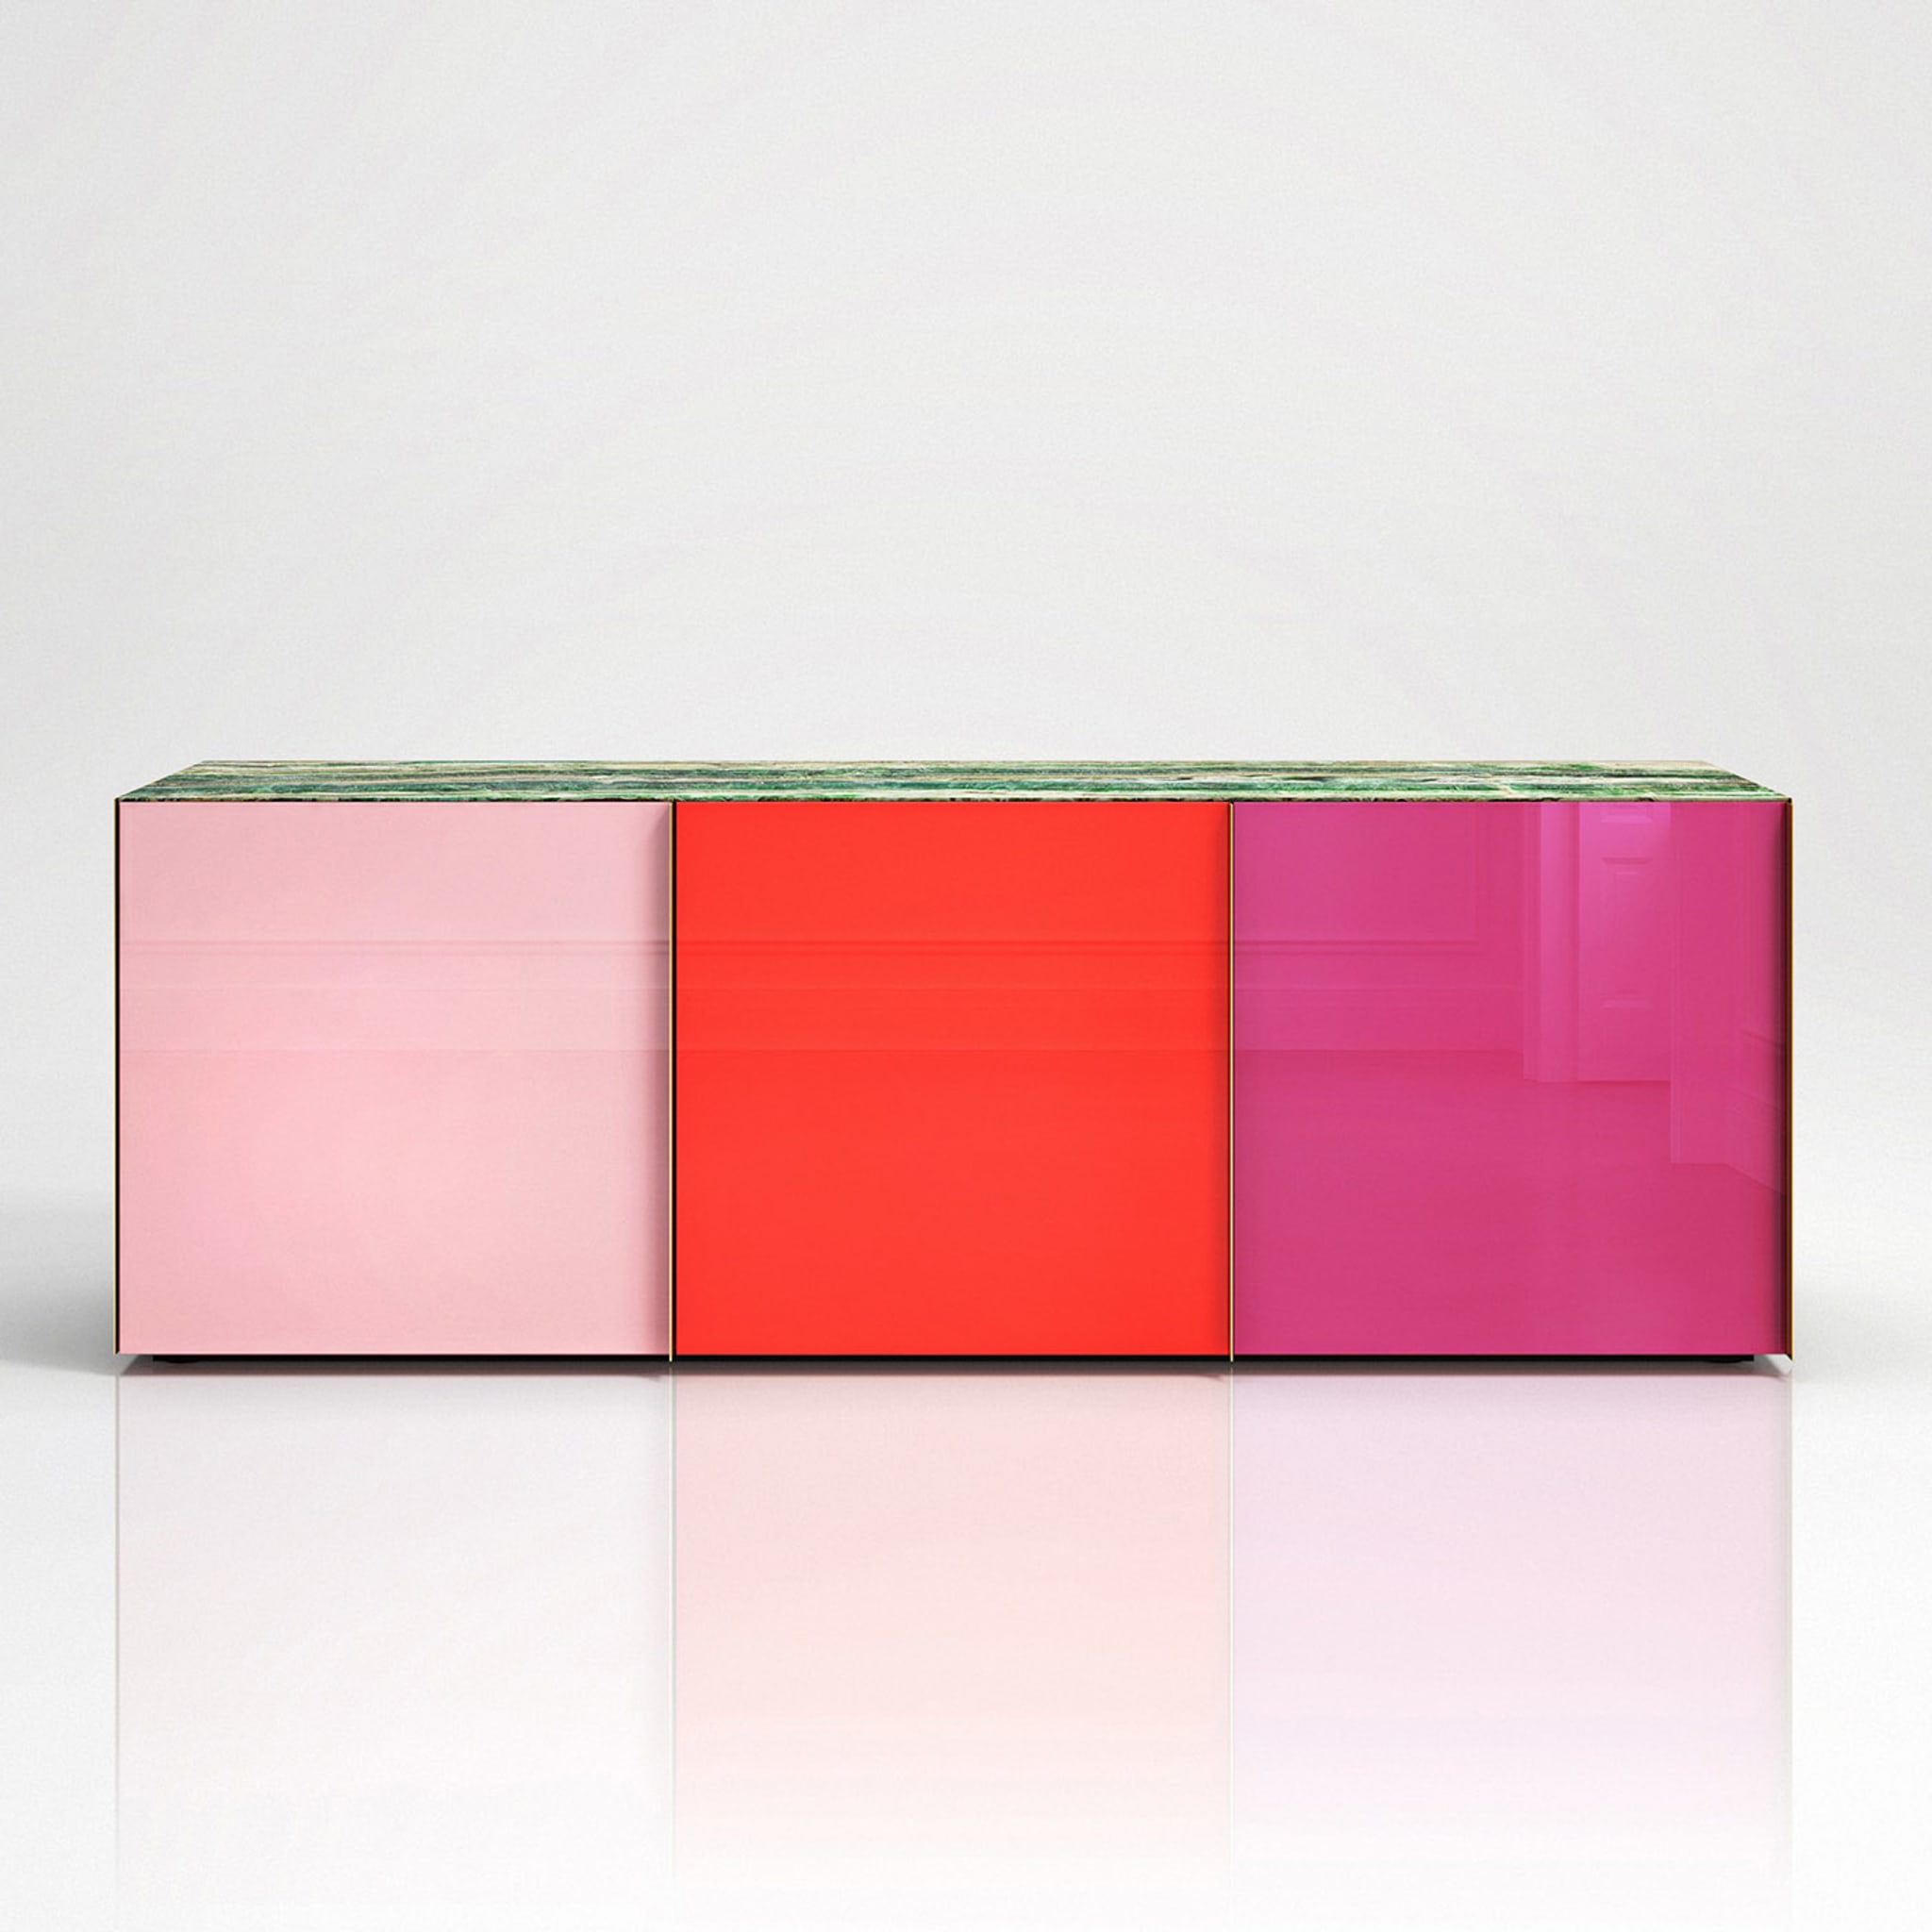 Sideboard 01 Red - Alternative view 2